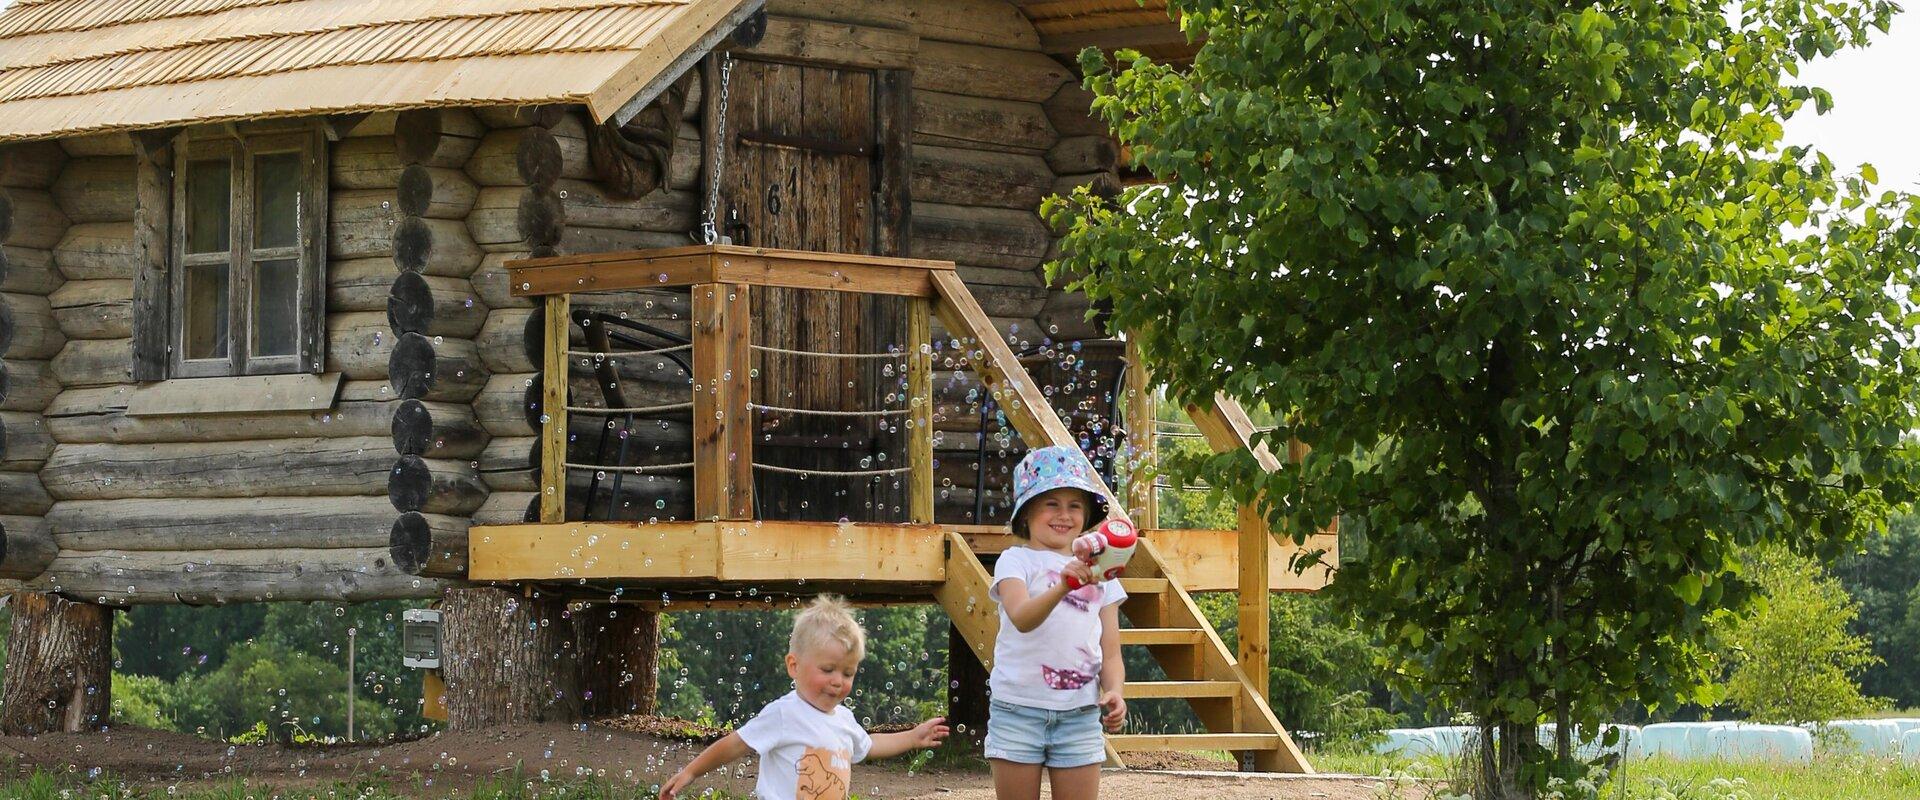 The Witch's Country offers a wide variety of activities for everyone - for the families and small groups, to birthday celebrators as well as bigger an